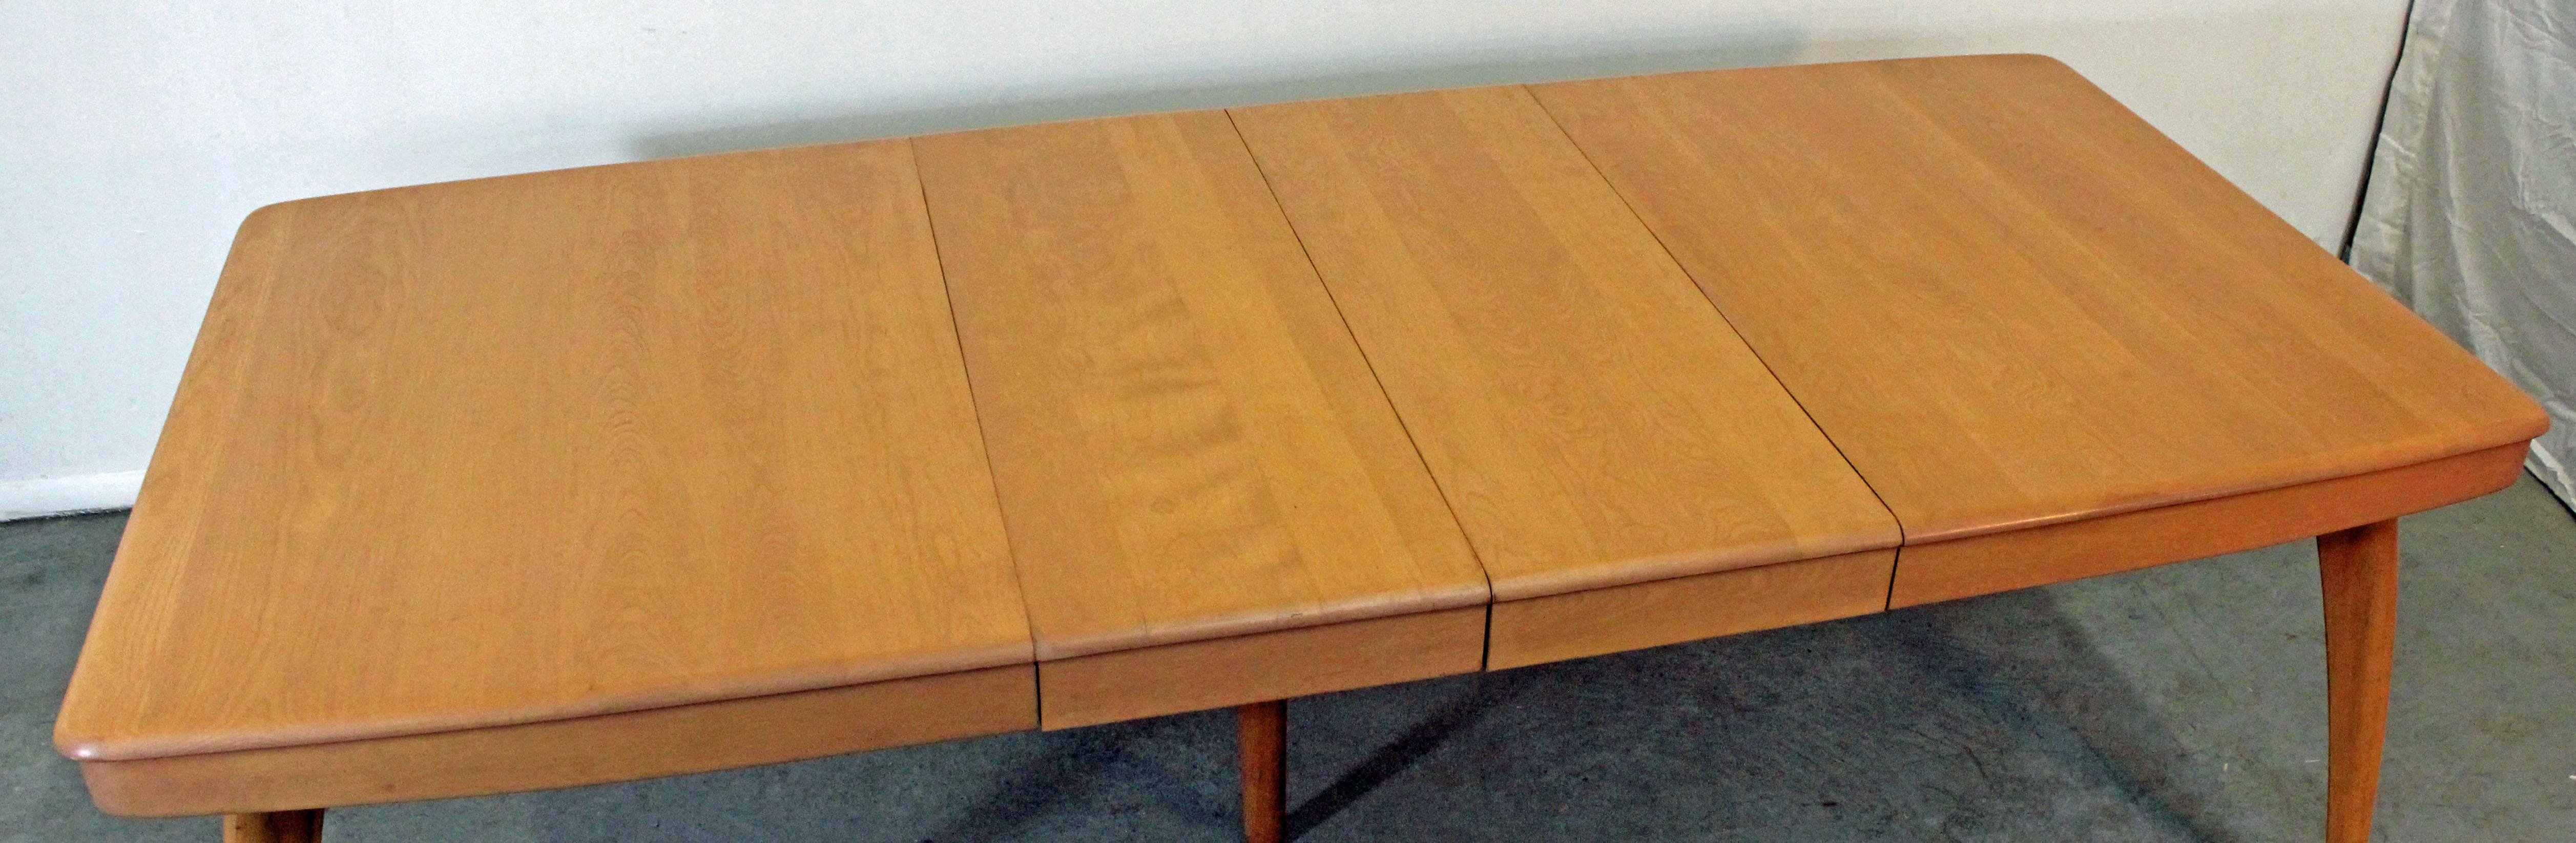 Birch Mid-Century Modern Heywood-Wakefield Champagne Extendable Dining Table